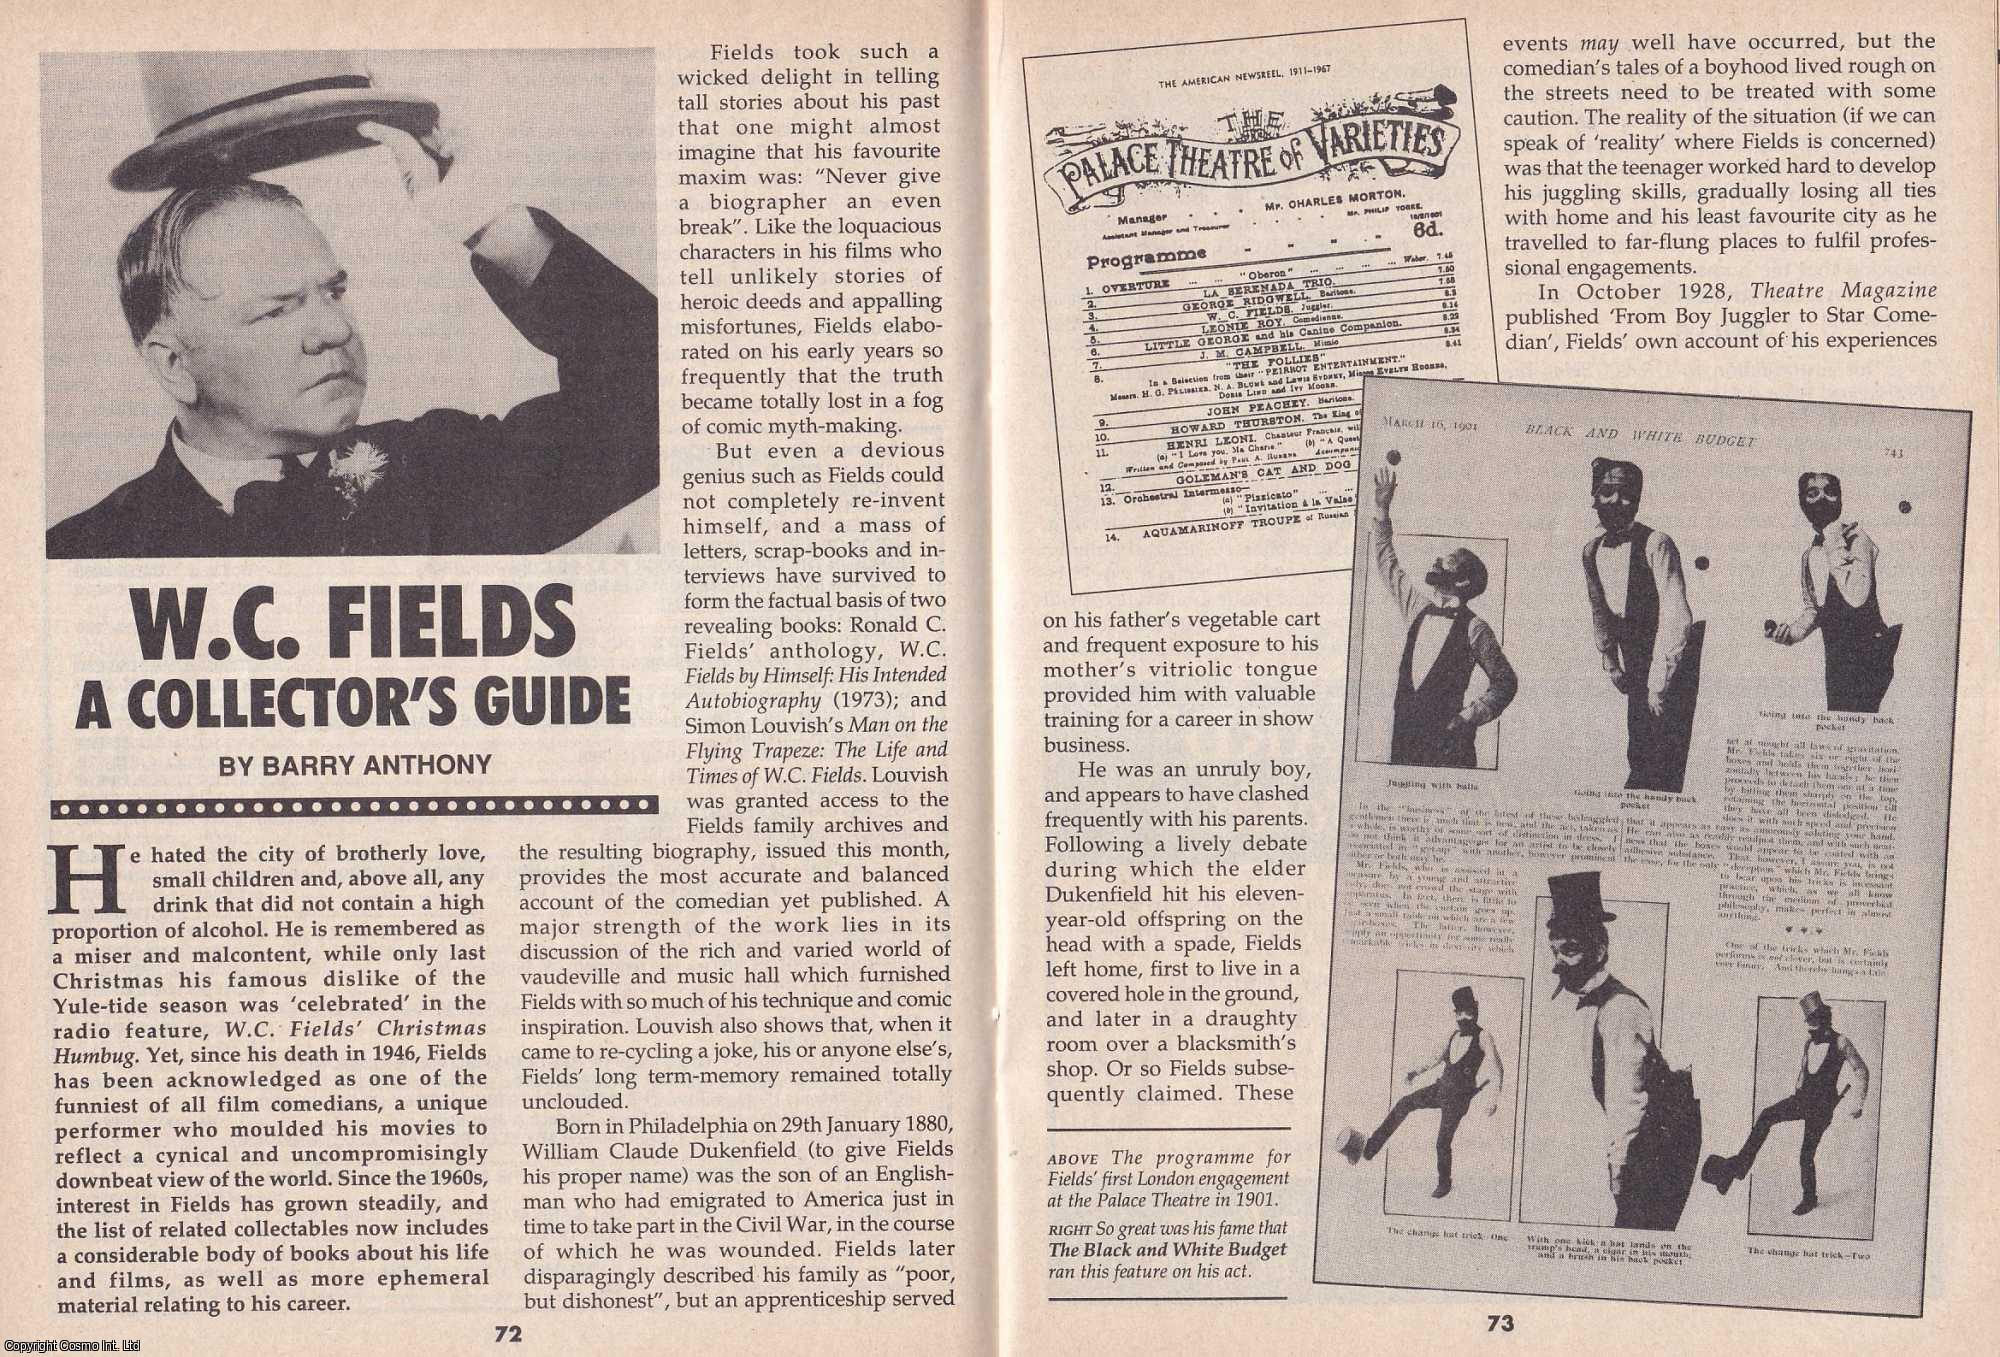 Barry Anthony - W. C. Fields. A Collector's Guide. This is an original article separated from an issue of The Book & Magazine Collector publication.